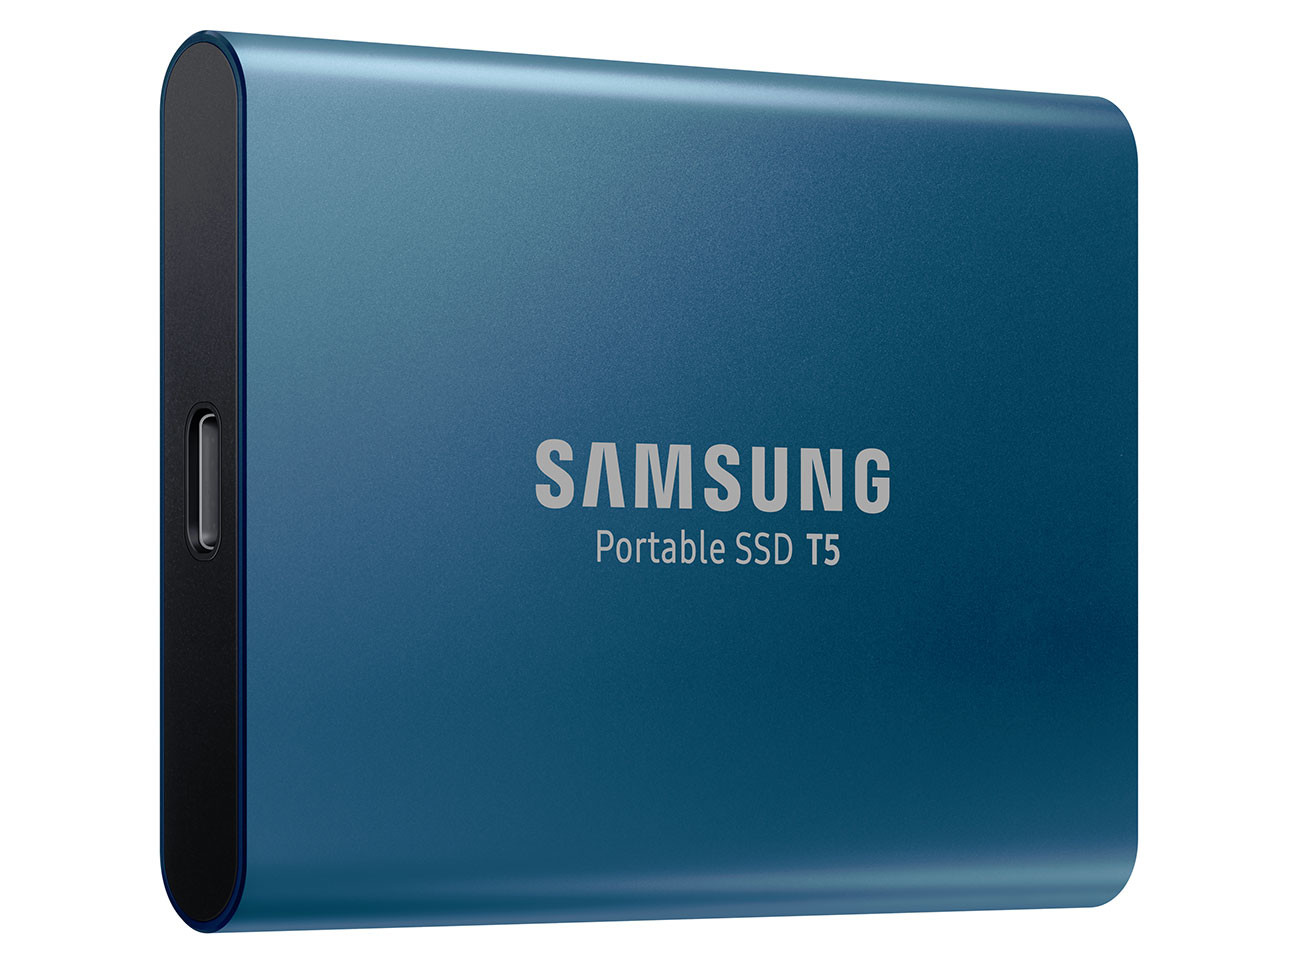 Review: Samsung Portable SSD T5 Offers Fast, Convenient Storage on